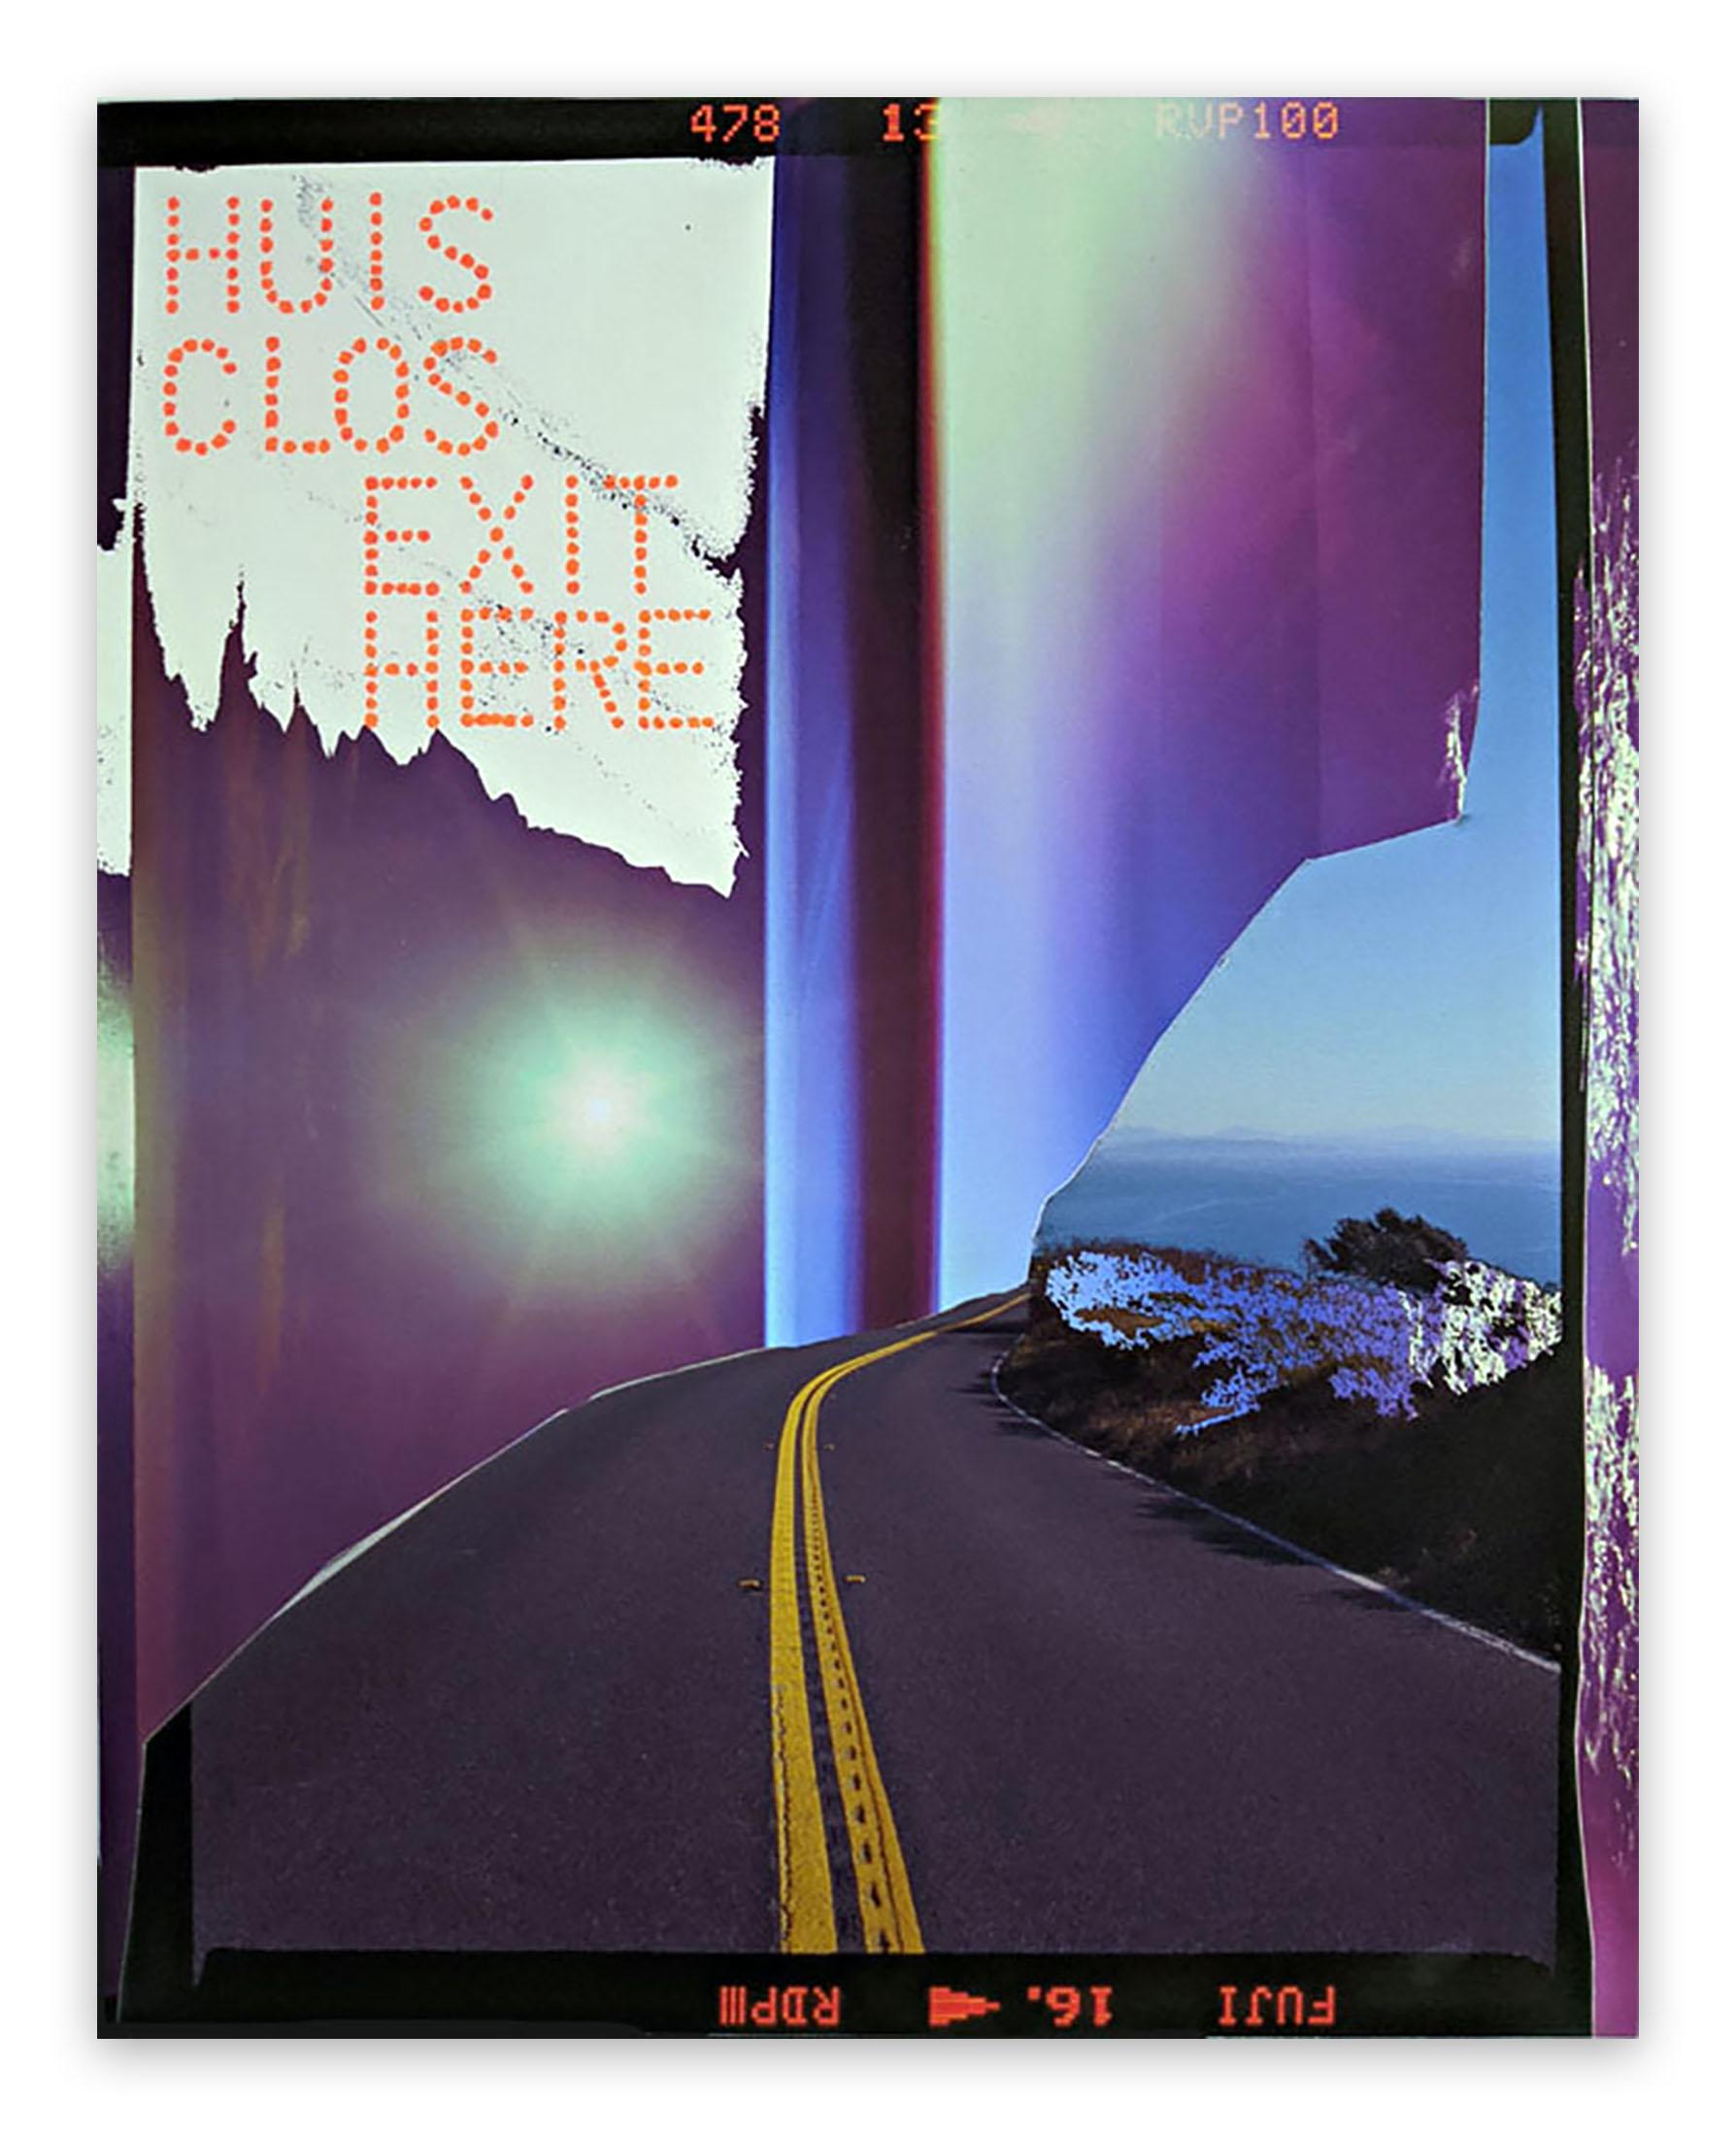 Jason Engelund Abstract Photograph - Huis Clos Exit Here (Abstract photography)